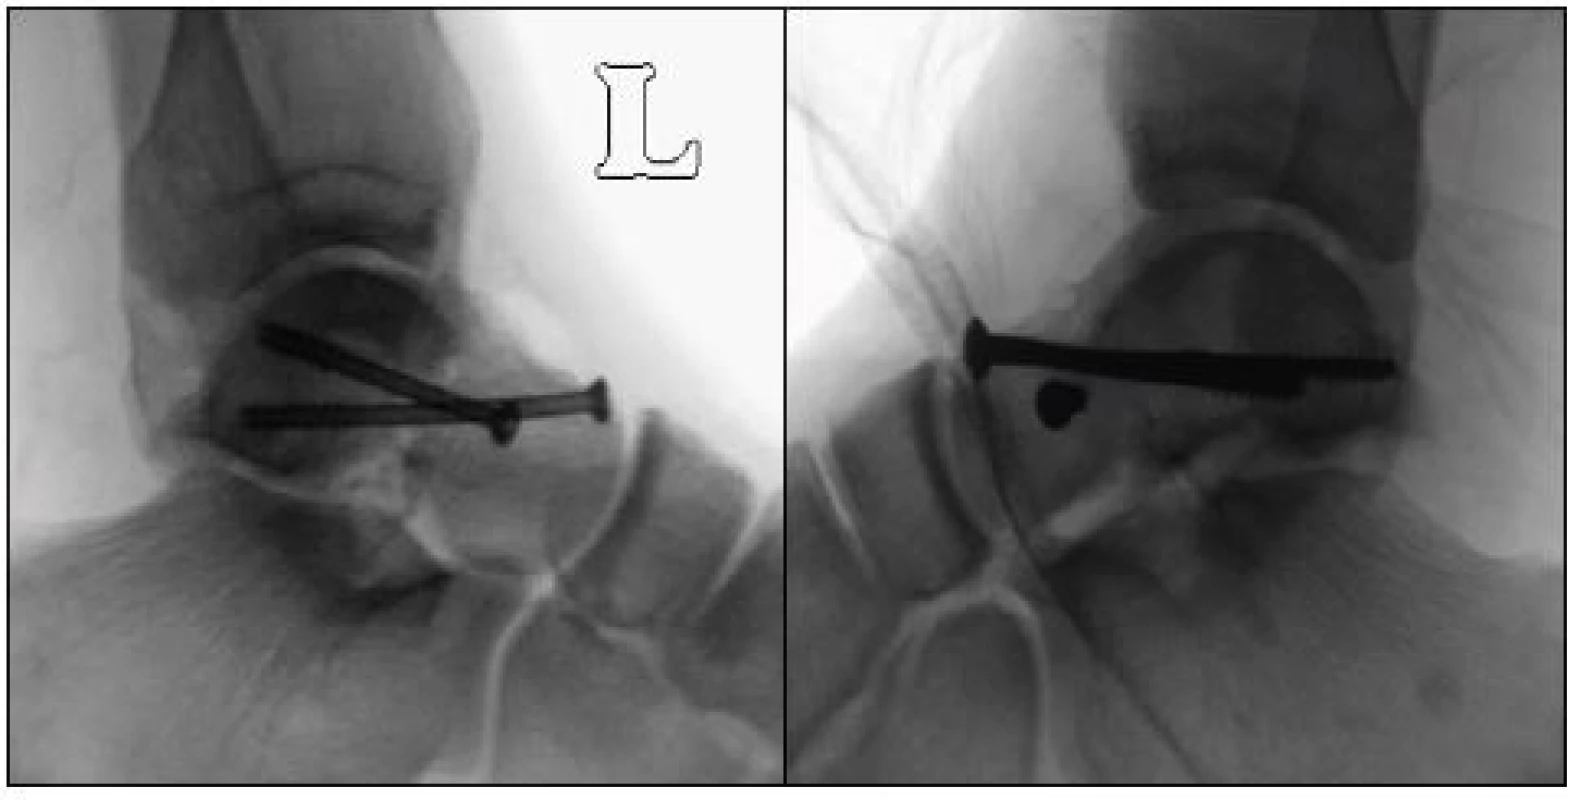 a, b: Postoperative radiographs of the ankle following osteosynthesis
with cannulated screws (4.0 mm)